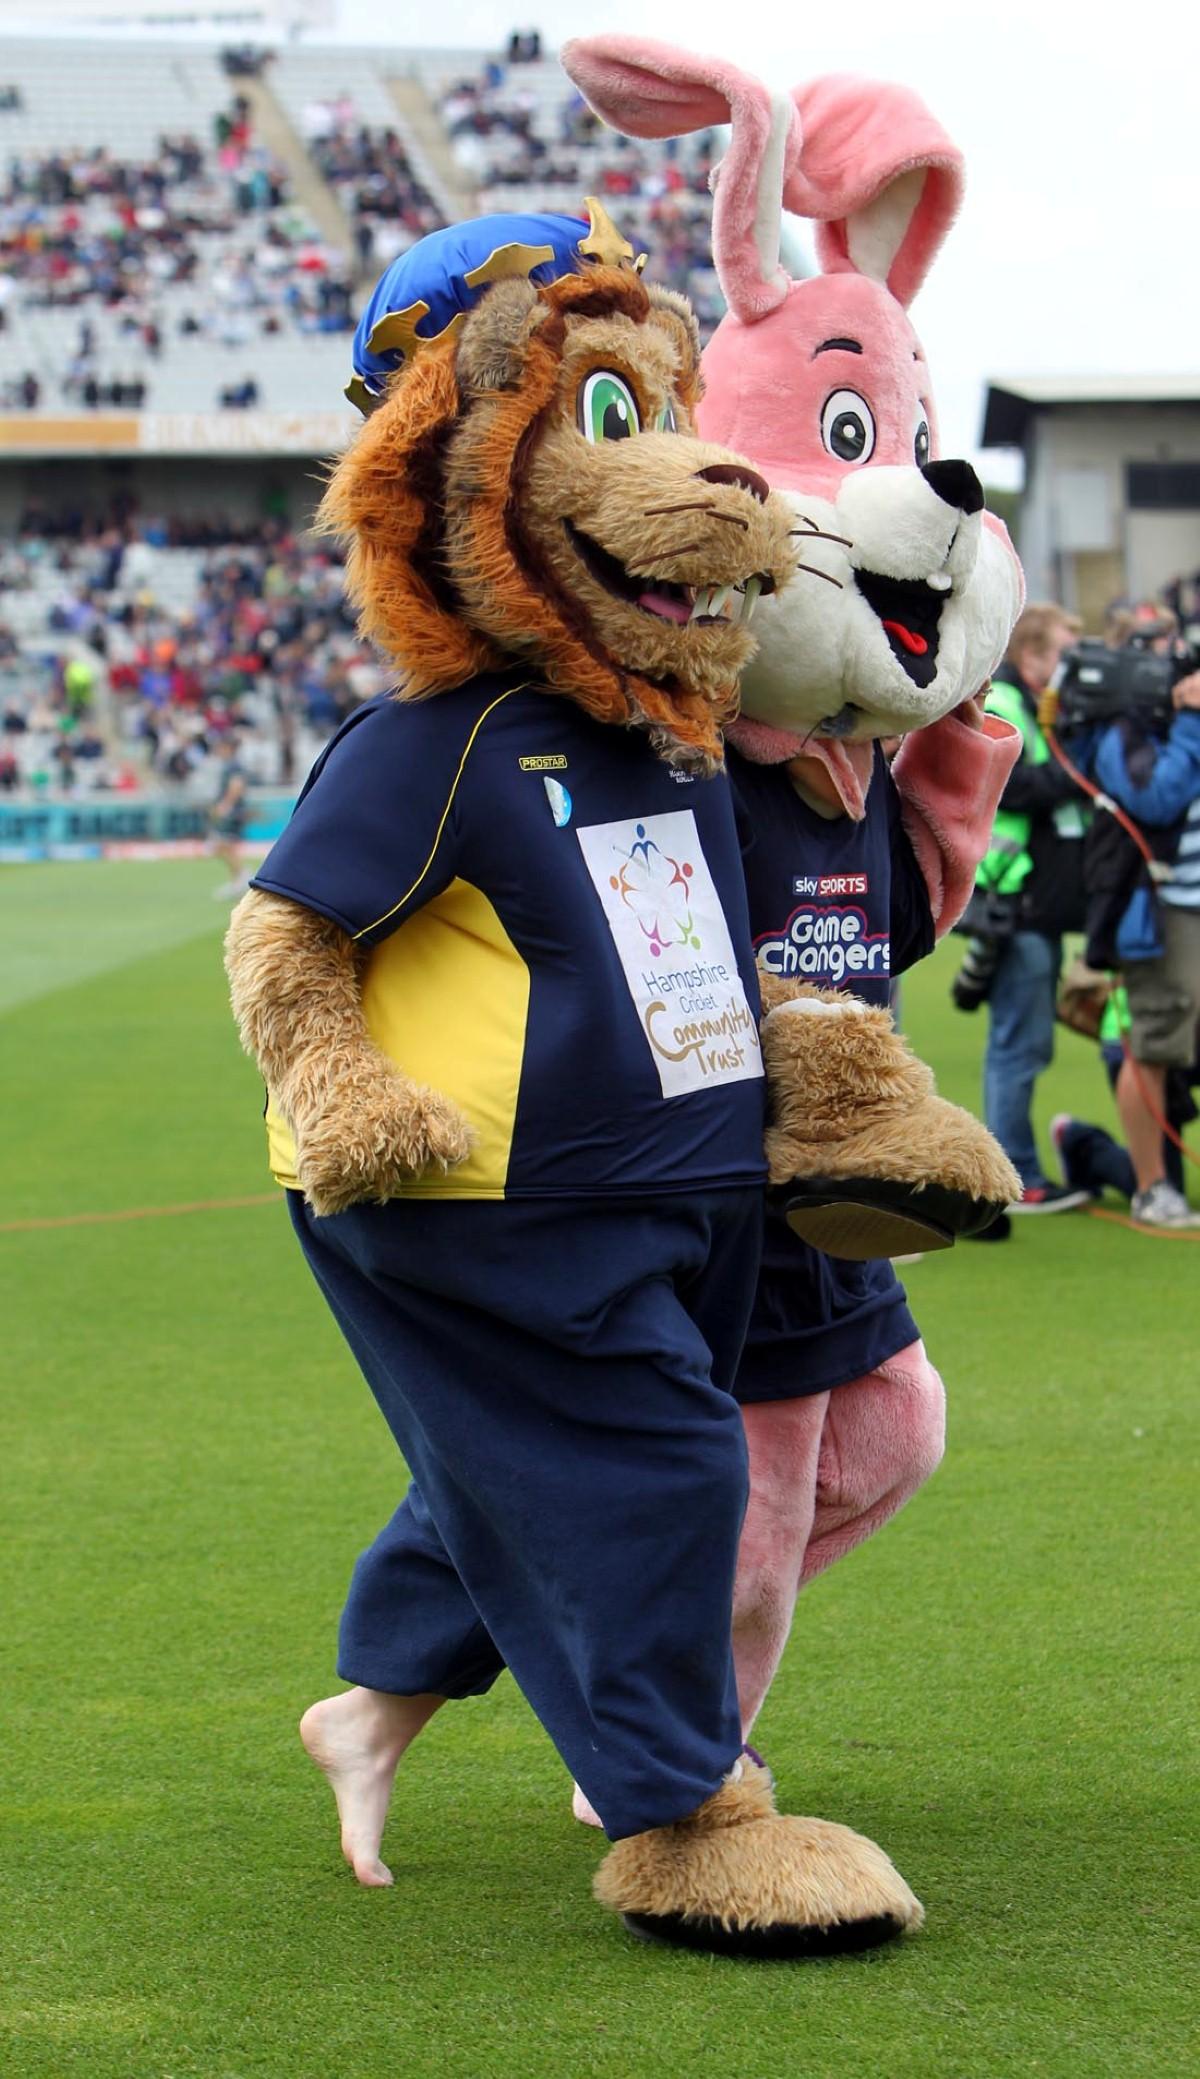 Picture from the Friends Life t20 Finals Day at Edgbaston.